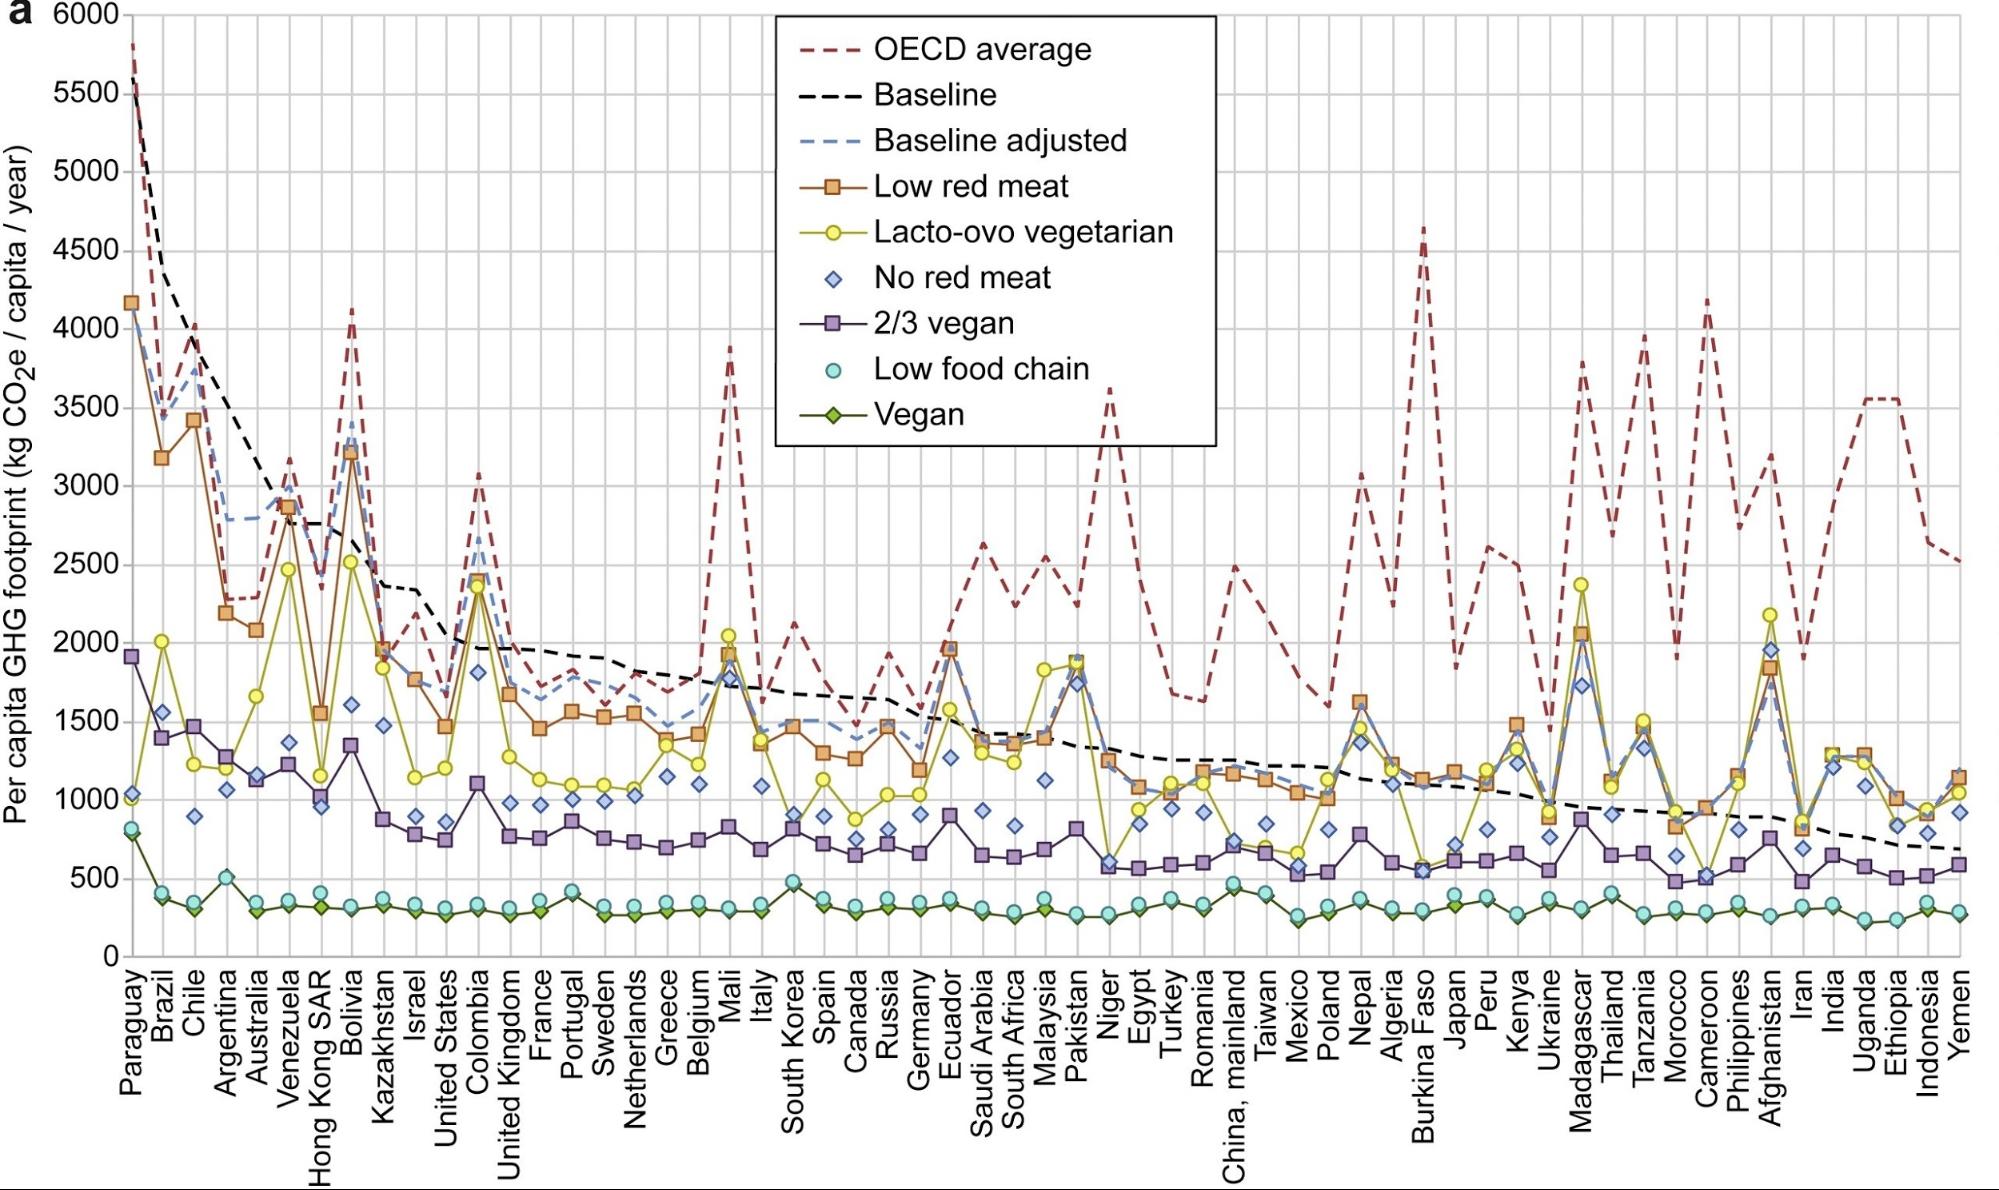 per capita GHG emissions for selected countries and diets